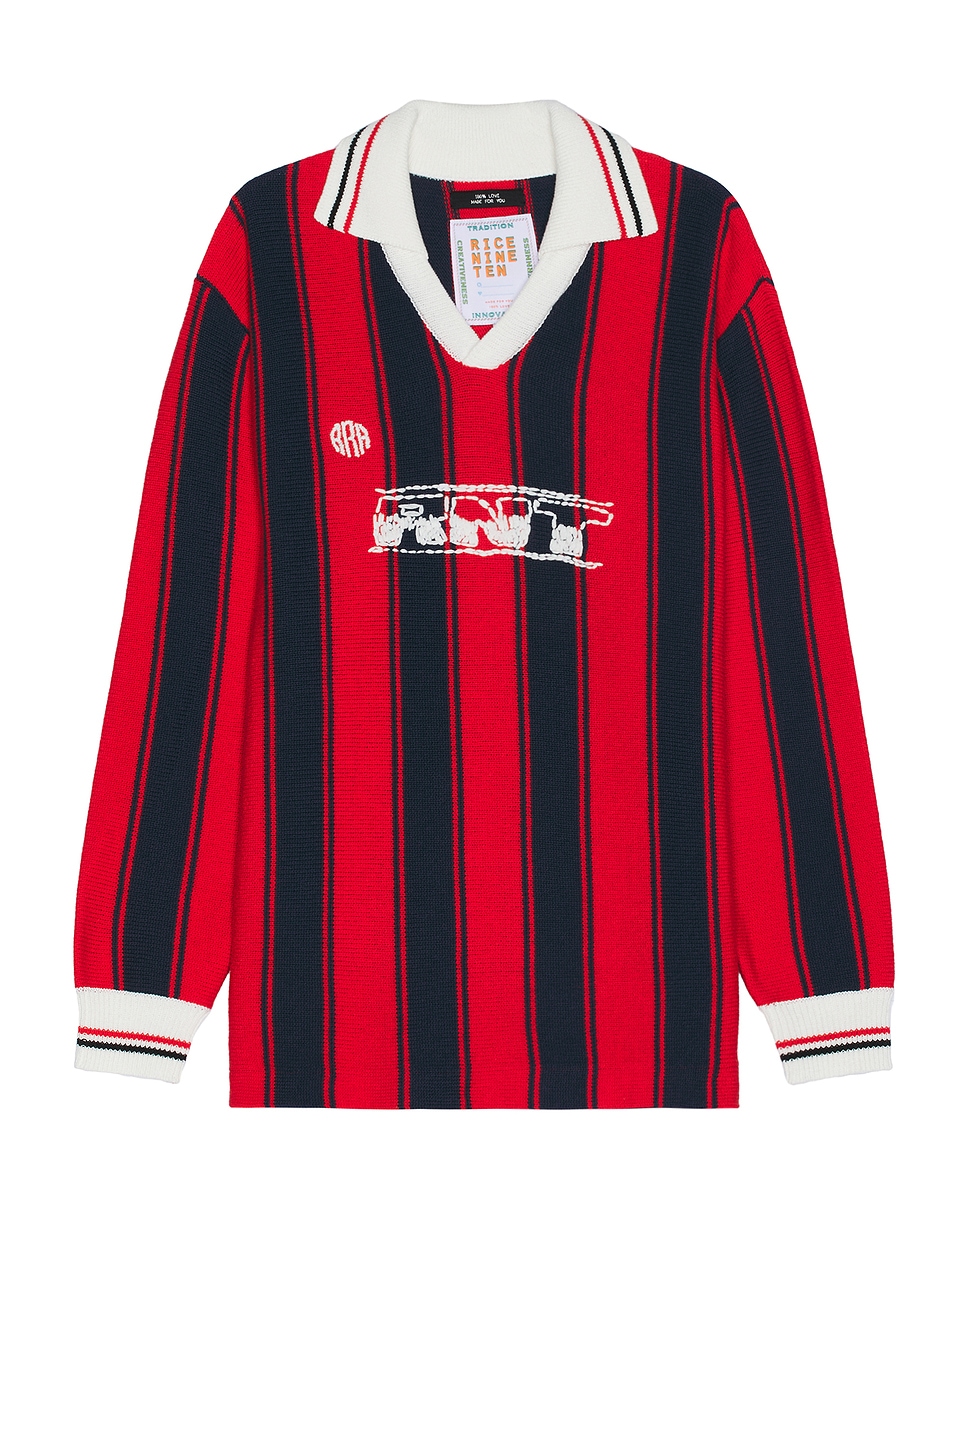 Image 1 of rice nine ten Knitting Long Sleeve Soccer Jersey in Red